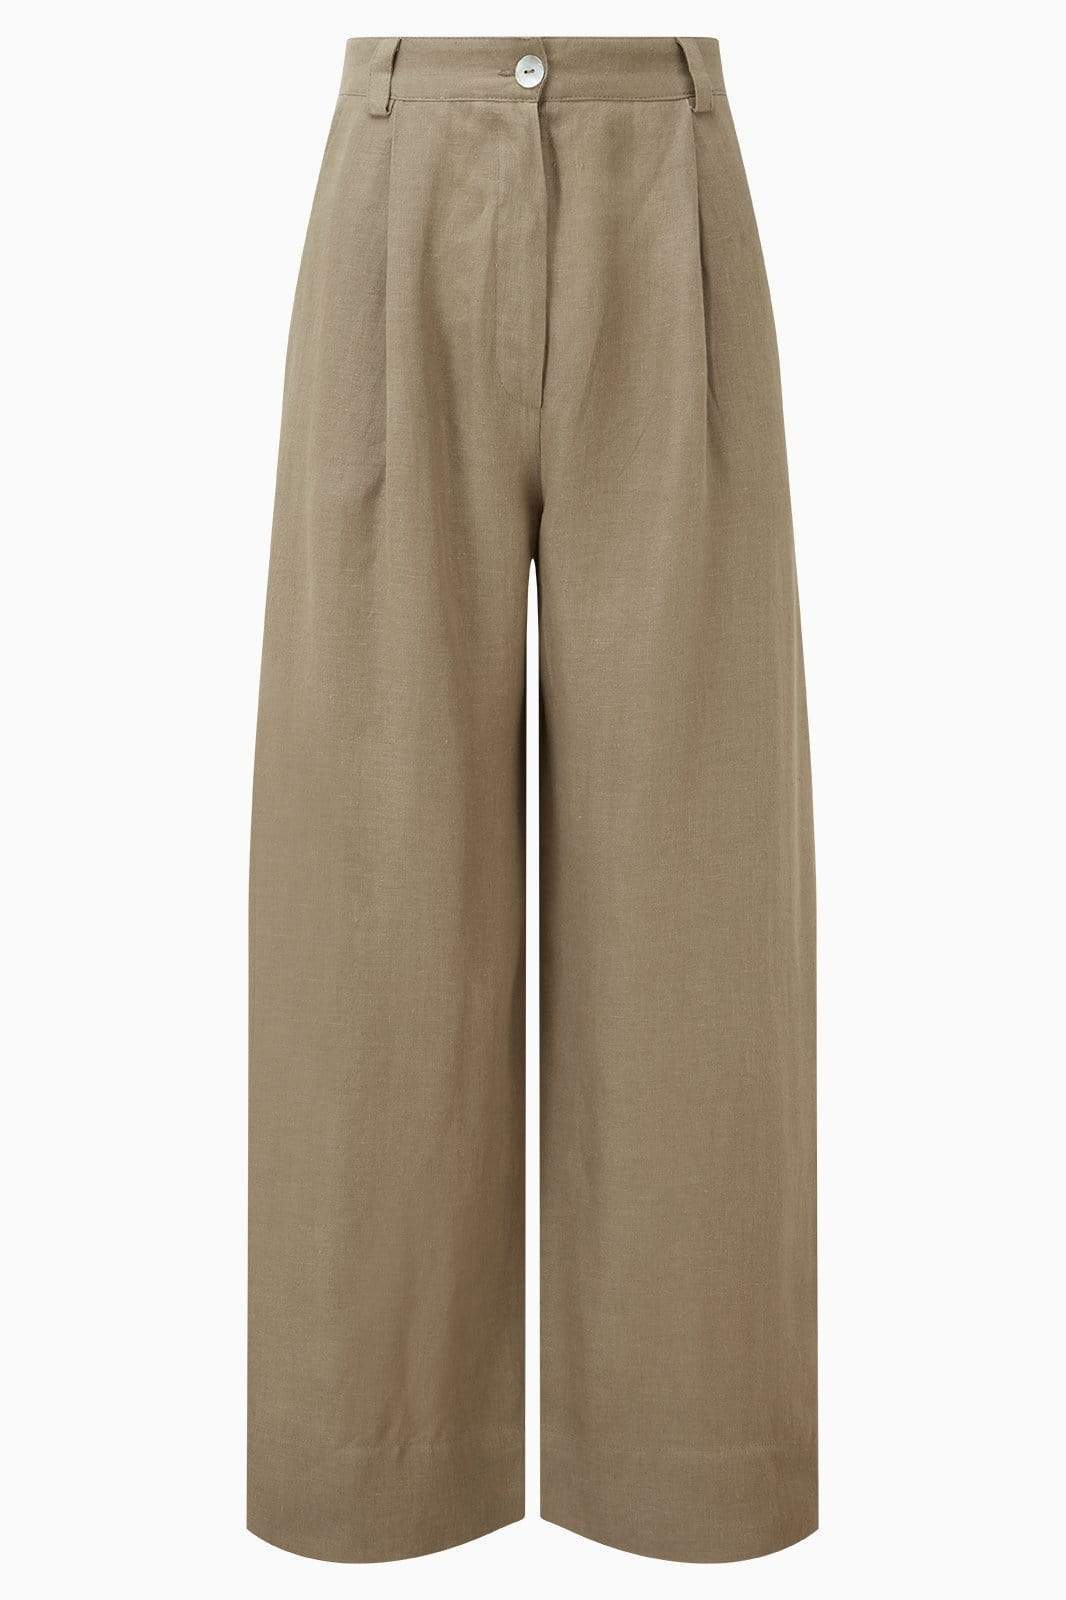 arkitaip Trousers XS The Wabi Pleated Linen Trousers in taupe - Sample